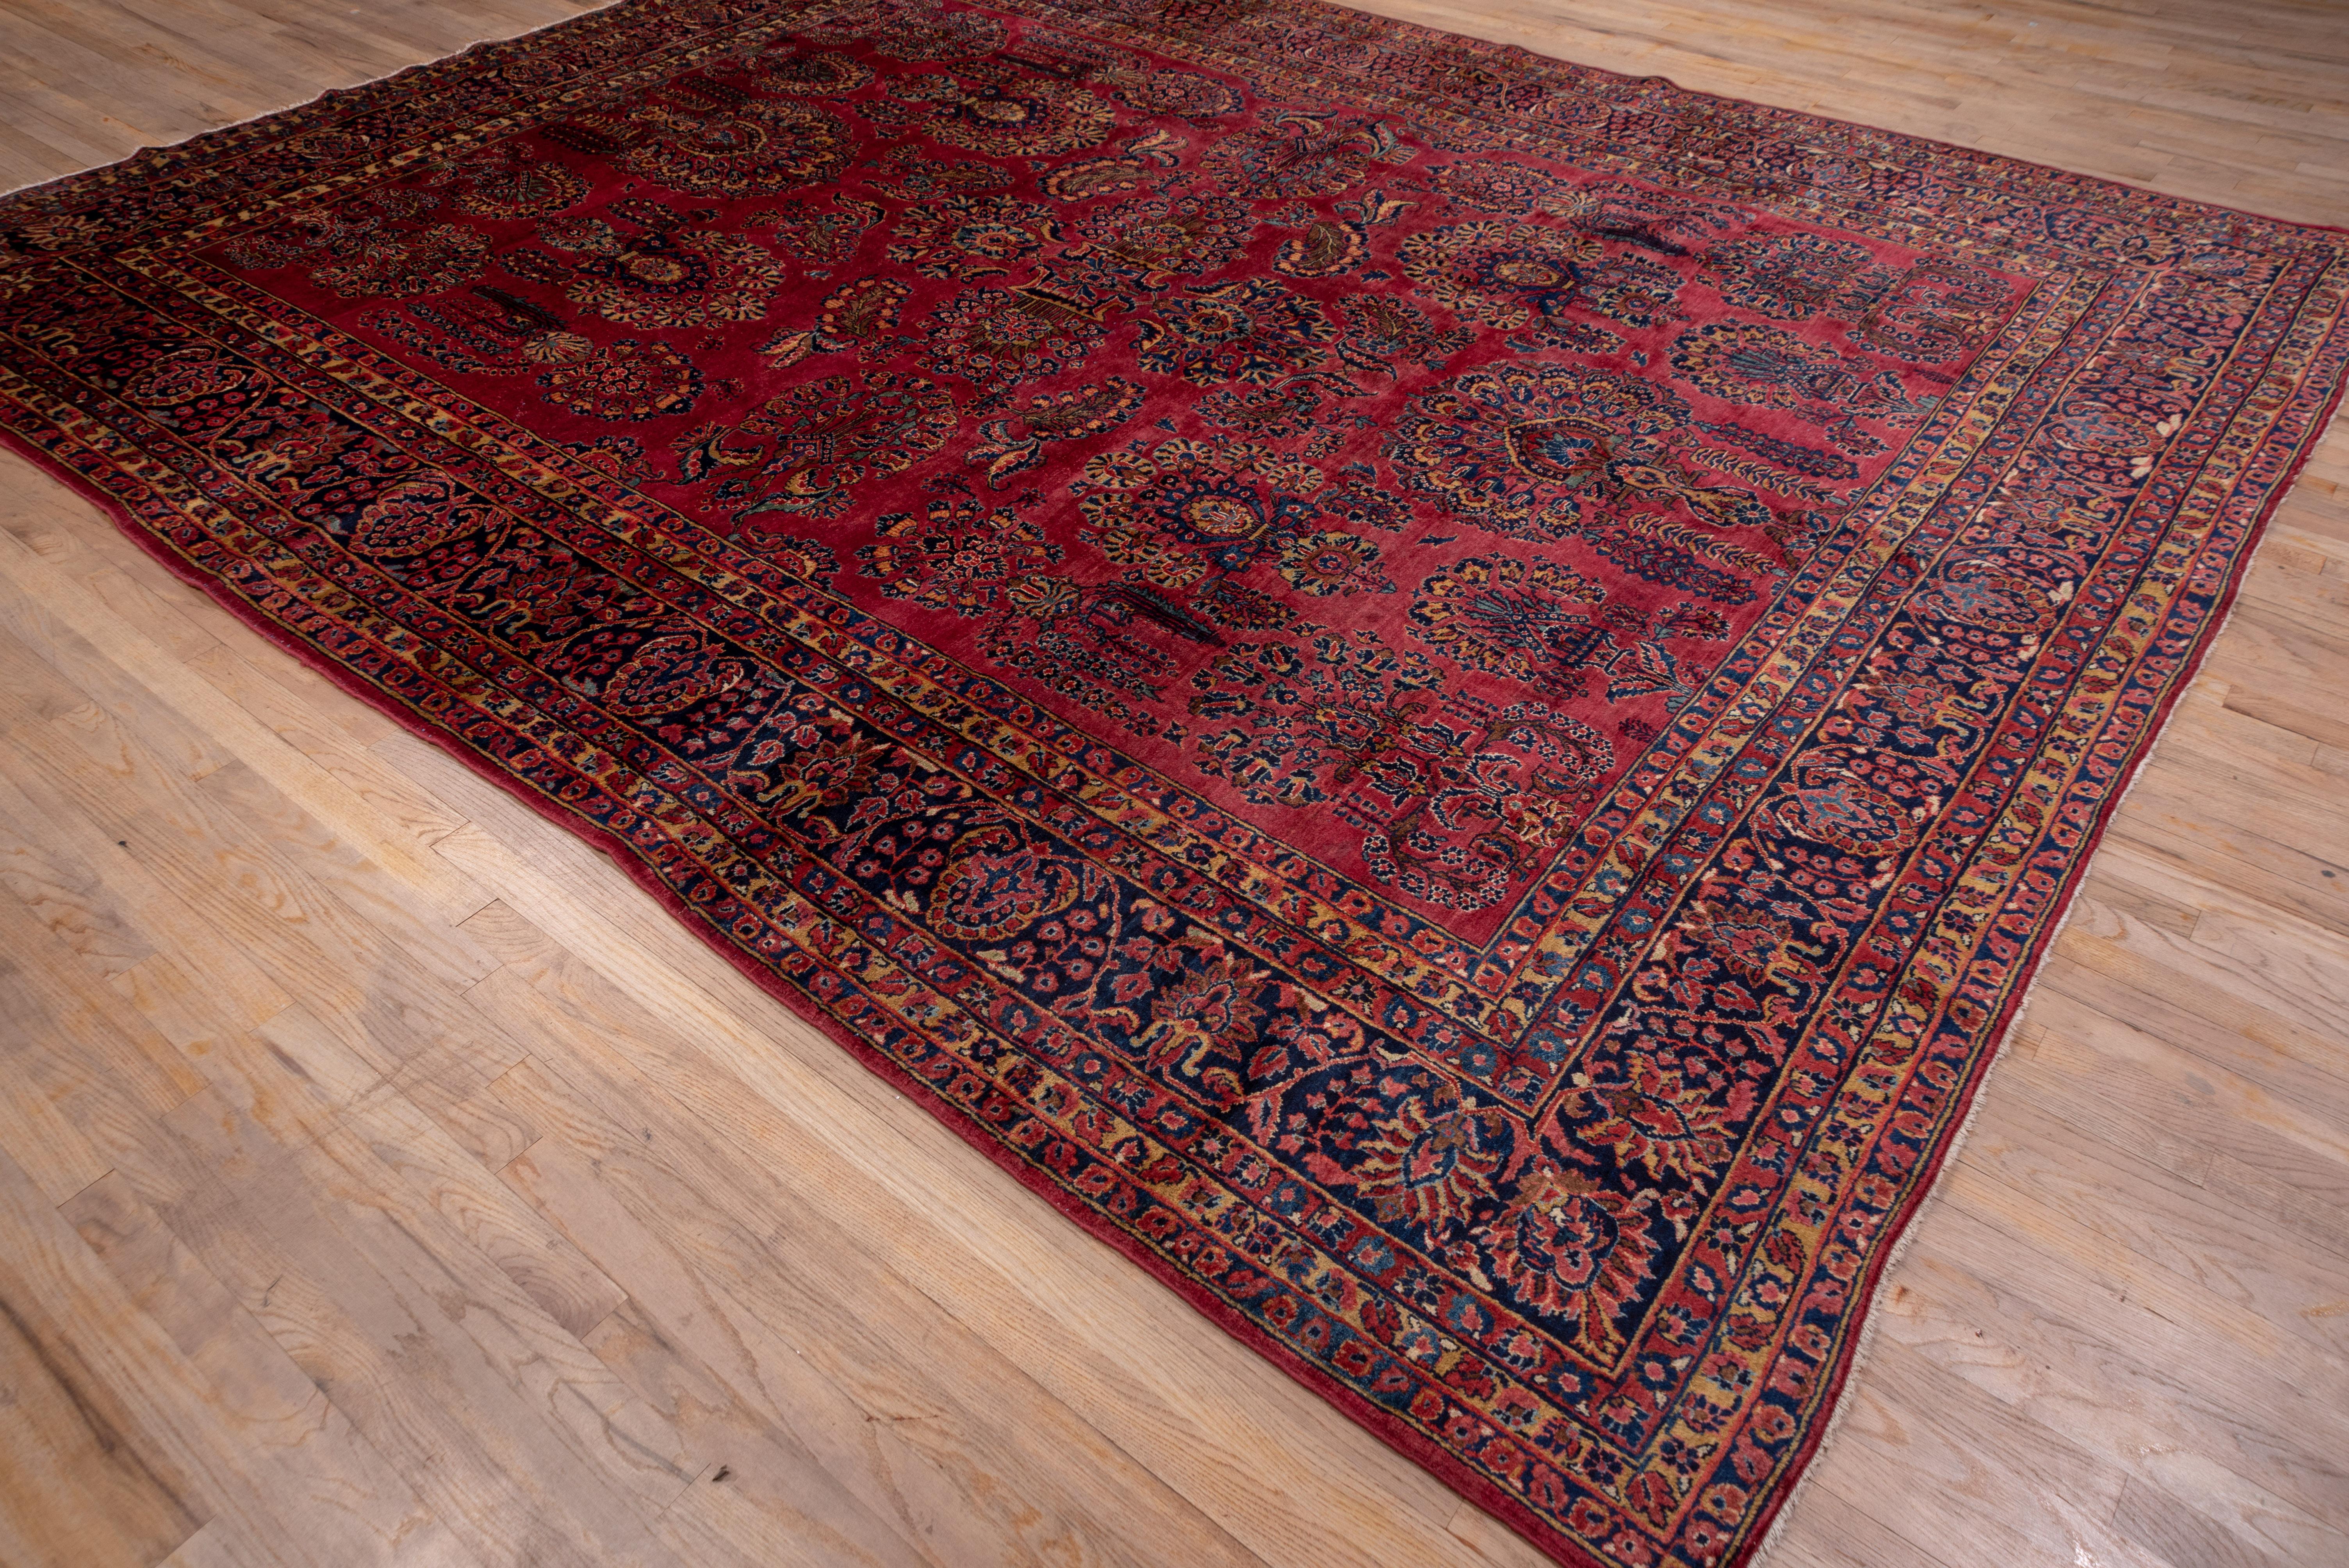 Sarouk Farahan Antique Persian Sarouk Rug, Bright Red Field, Gold and Blue Accents, Medium Pile For Sale